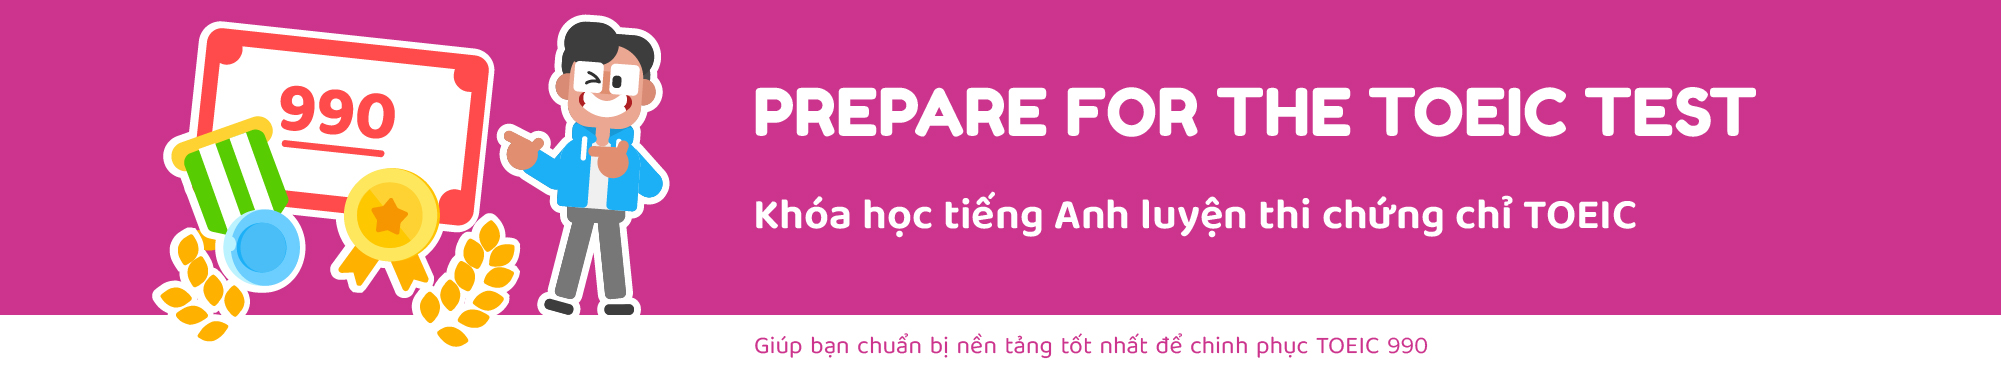 Prepare for the TOEIC Test banner